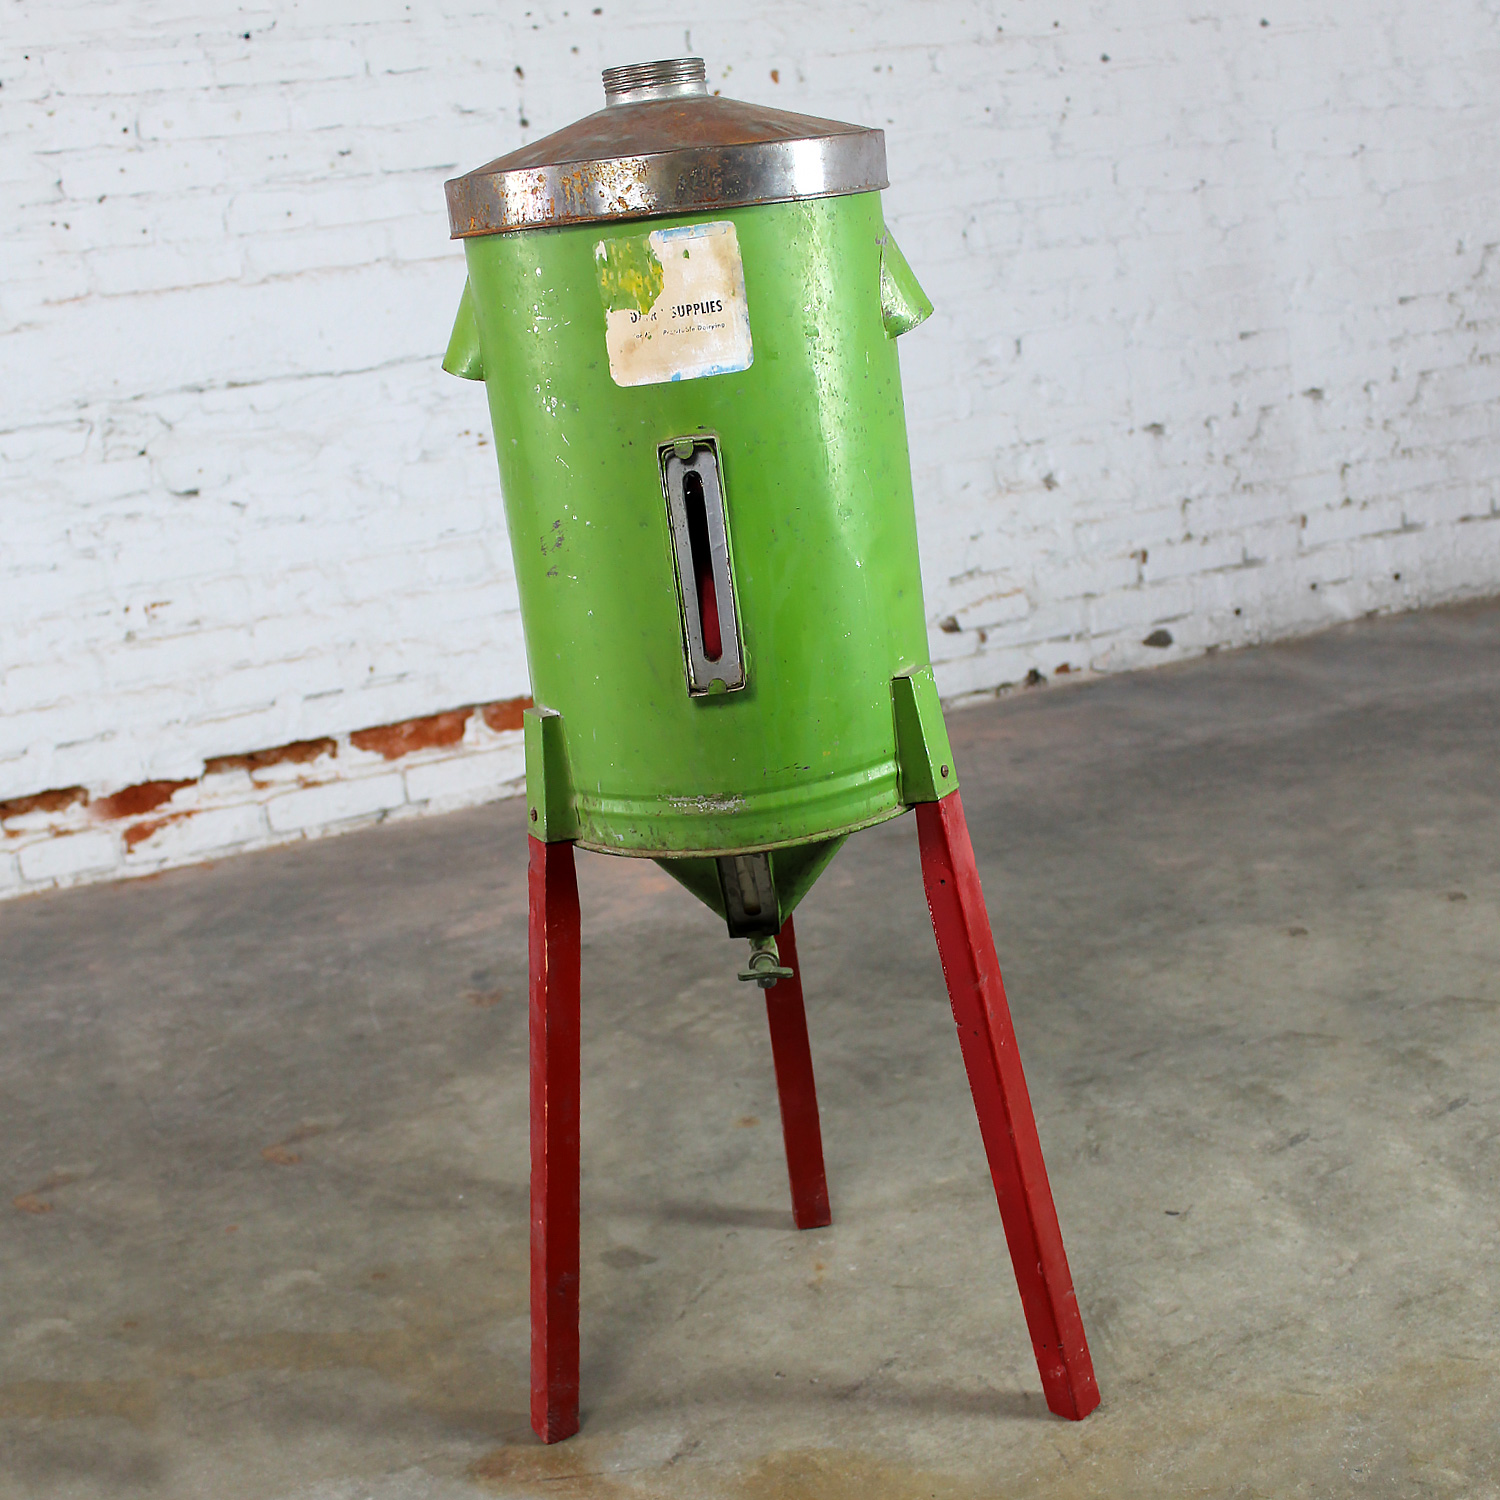 Early to Mid-20th Century Antique Rustic Gravity Cream Separator Green Metal Can on Red Legs